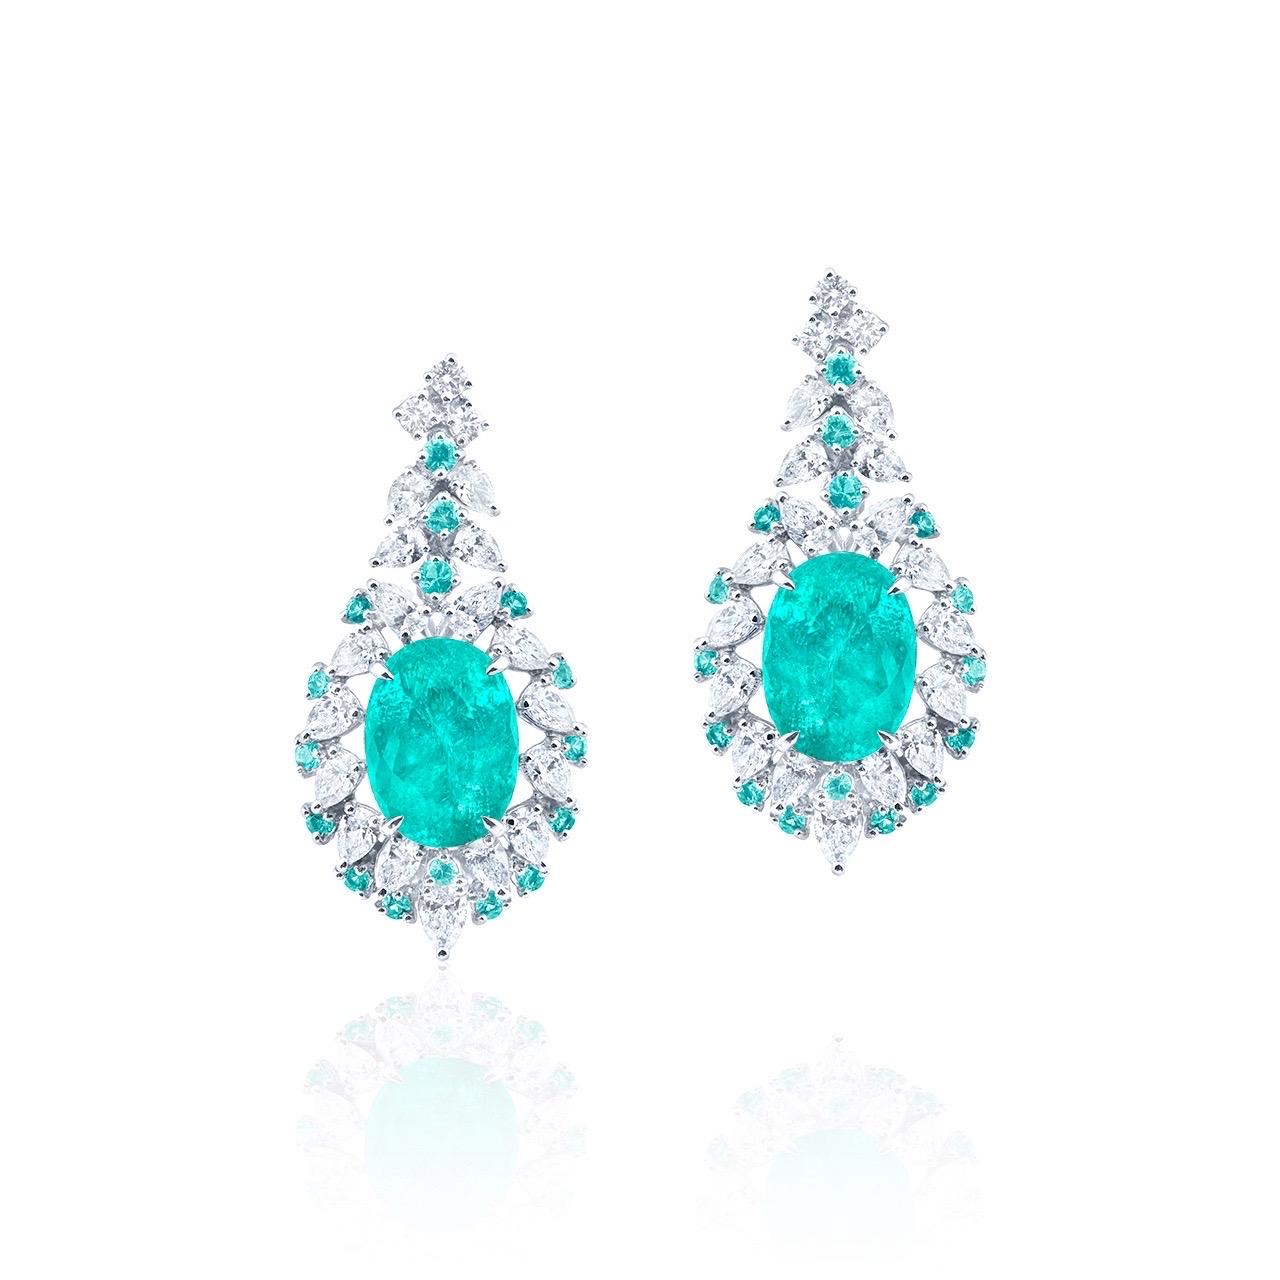 From Emilio Jewelry, a dealer/wholesaler located on New Yorks iconic fifth avenue,
two fine Paraibas totaling 9.69ct 
Matching setting: white diamonds totaling approximately 3.45 carats, Paraiba tourmalines totaling approximately 0.21